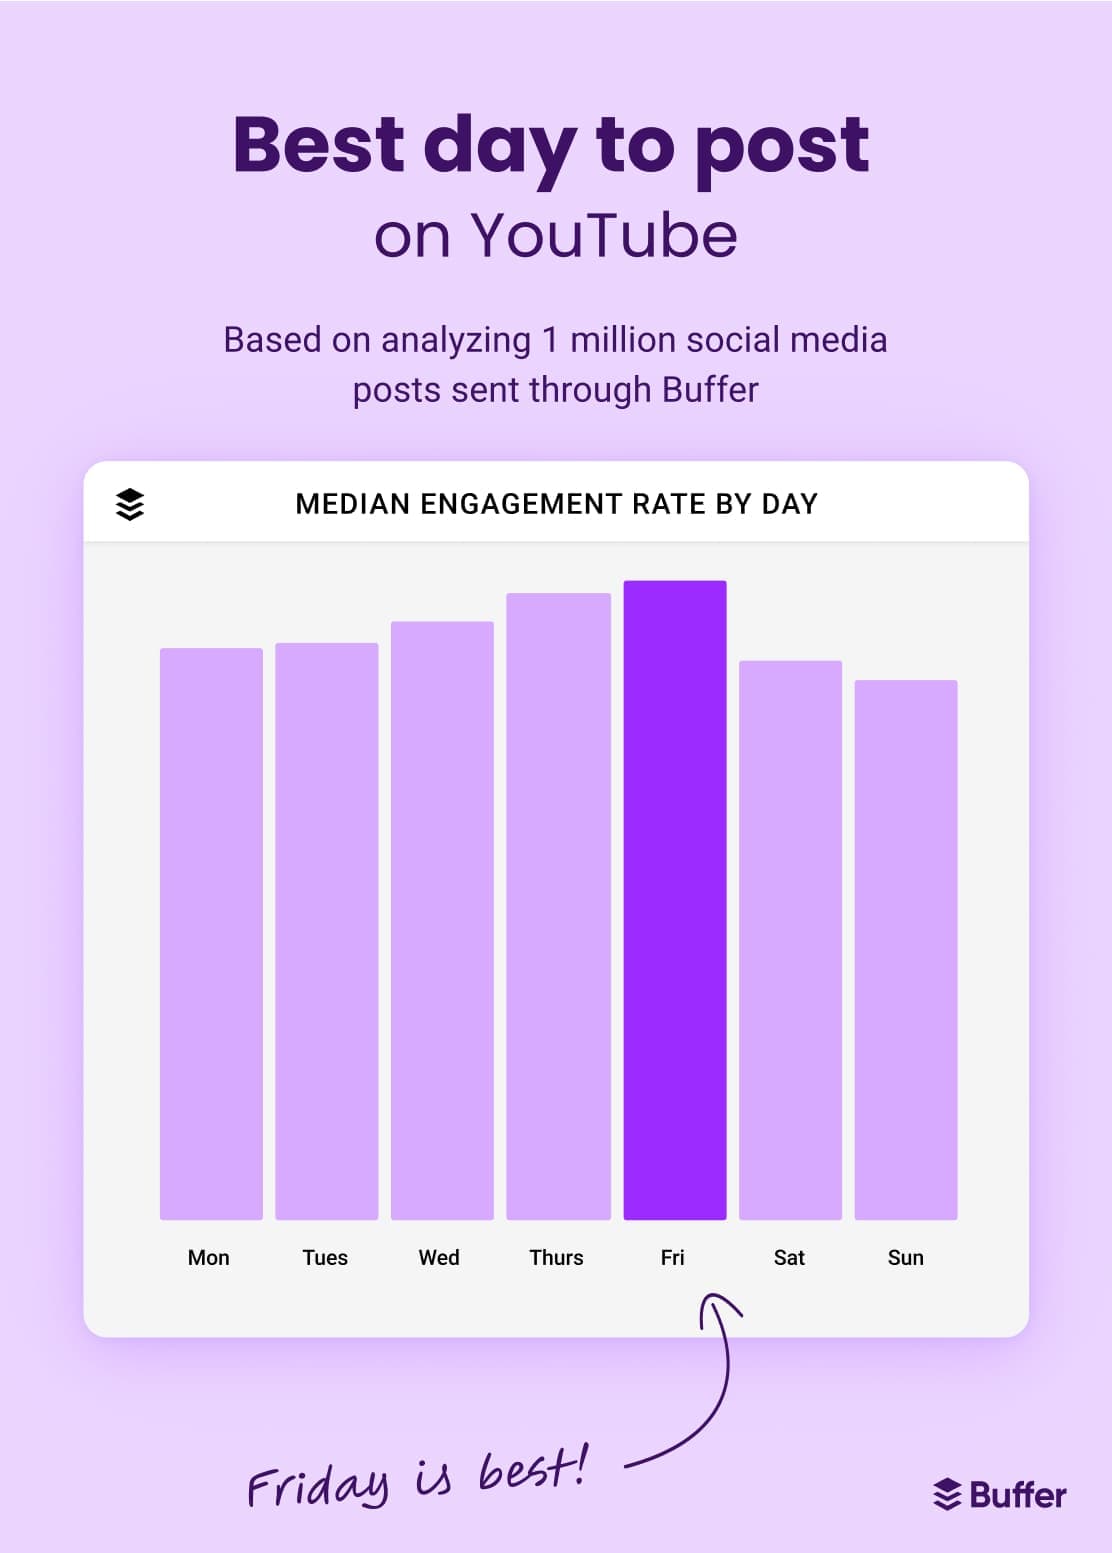 Bar chart of the best day to post on YouTube based on analyzing 1 million social media posts sent through Buffer displaying Friday as the best day to post, followed by Thursday, Wednesday, Tuesday, Monday, Saturday, and lastly Sunday.